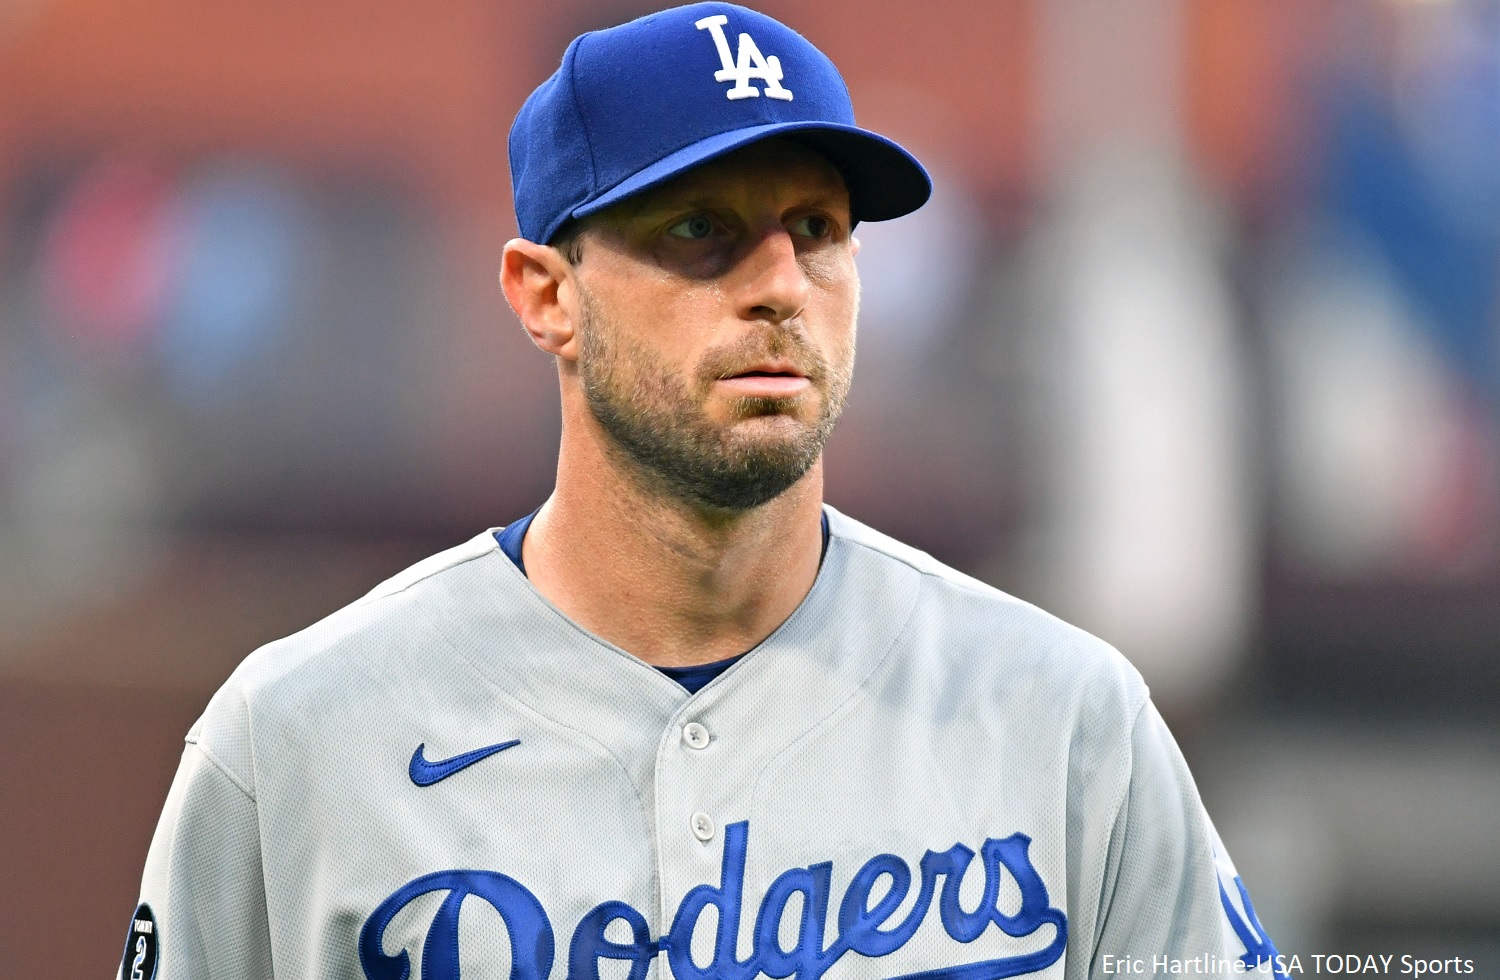 Max Scherzer set for New York Mets in MLB record $43m-a-year contract, New  York Mets